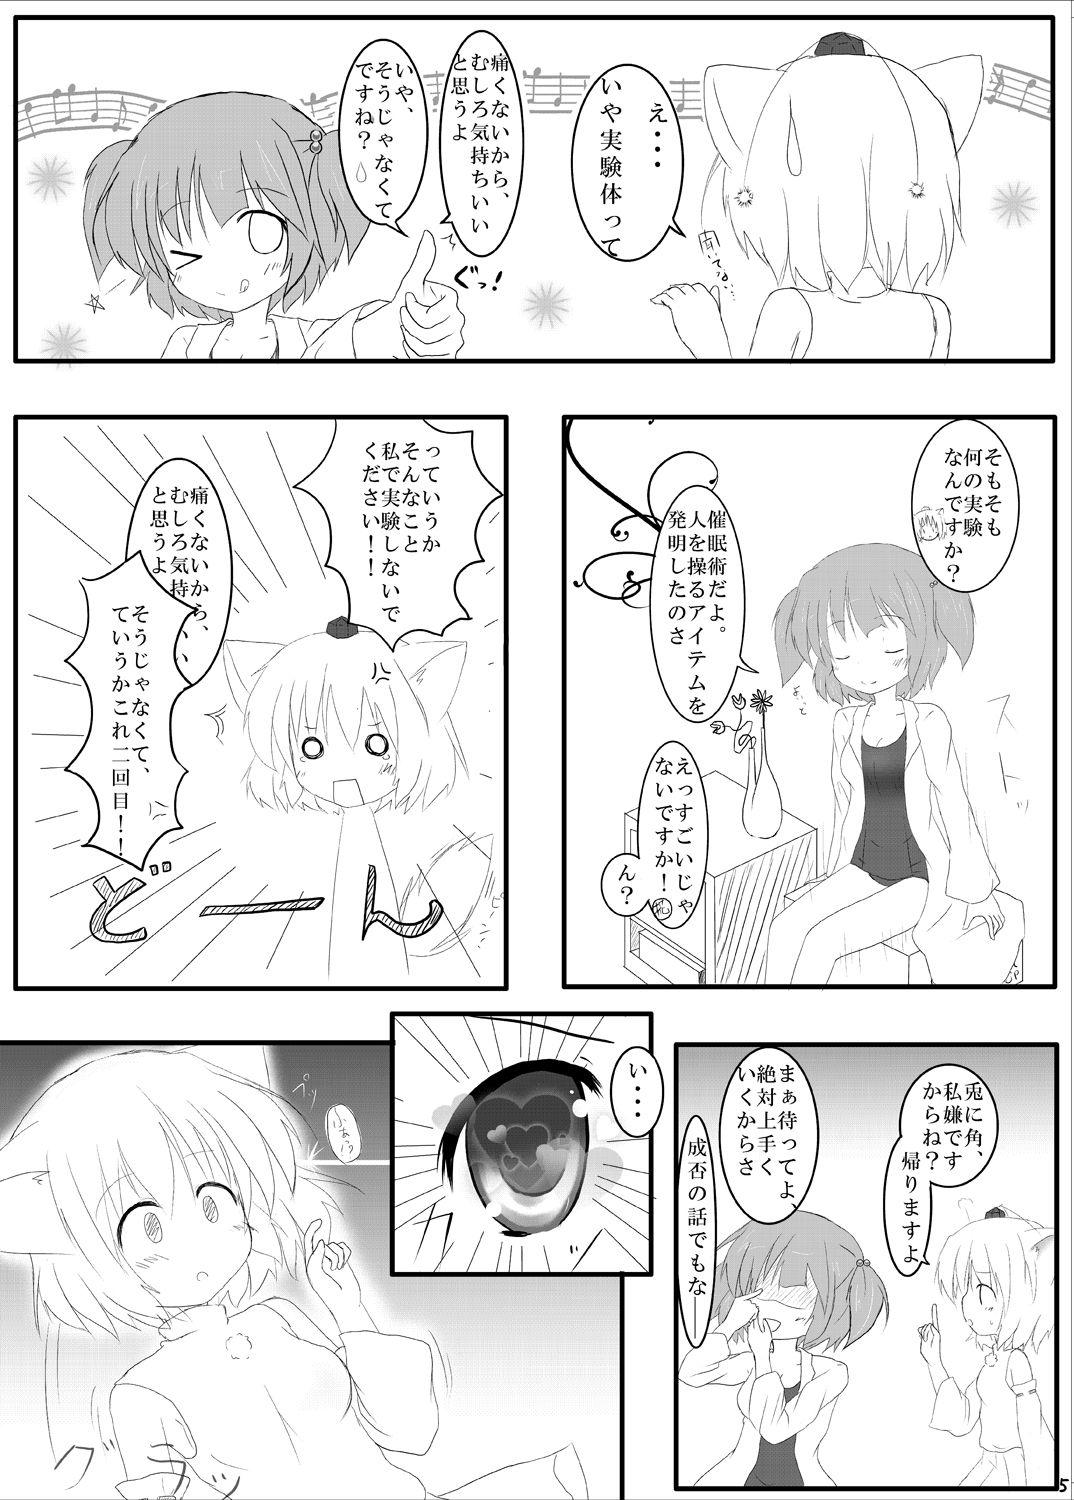 Cocksucking H na "Me" ni Acchatta! - Touhou project Amateur - Page 4